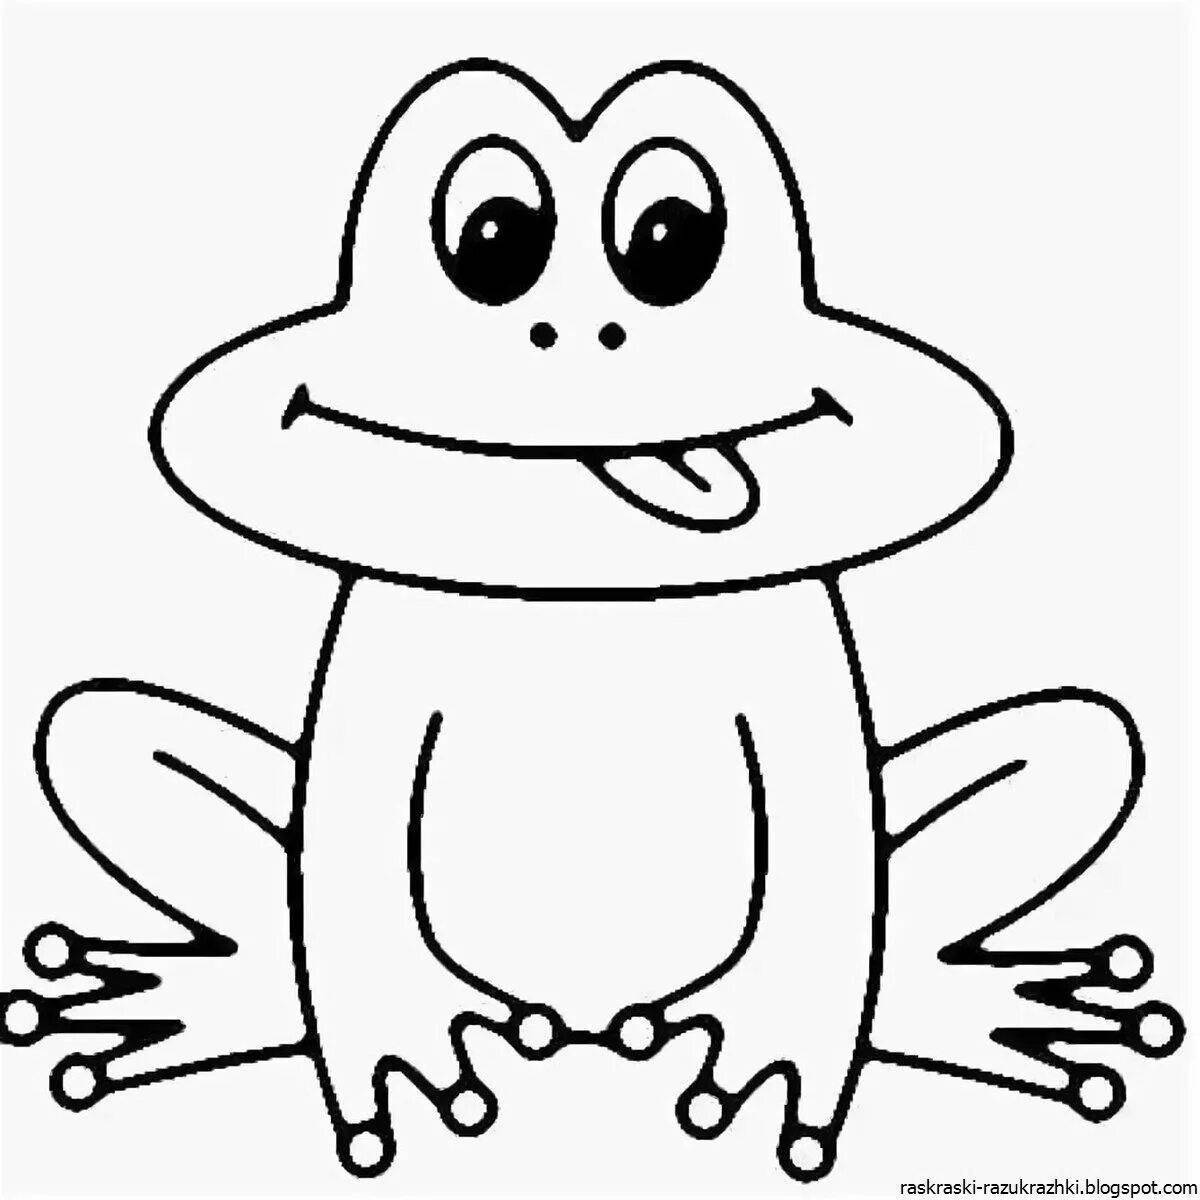 Coloured coloring pages for children 3 4